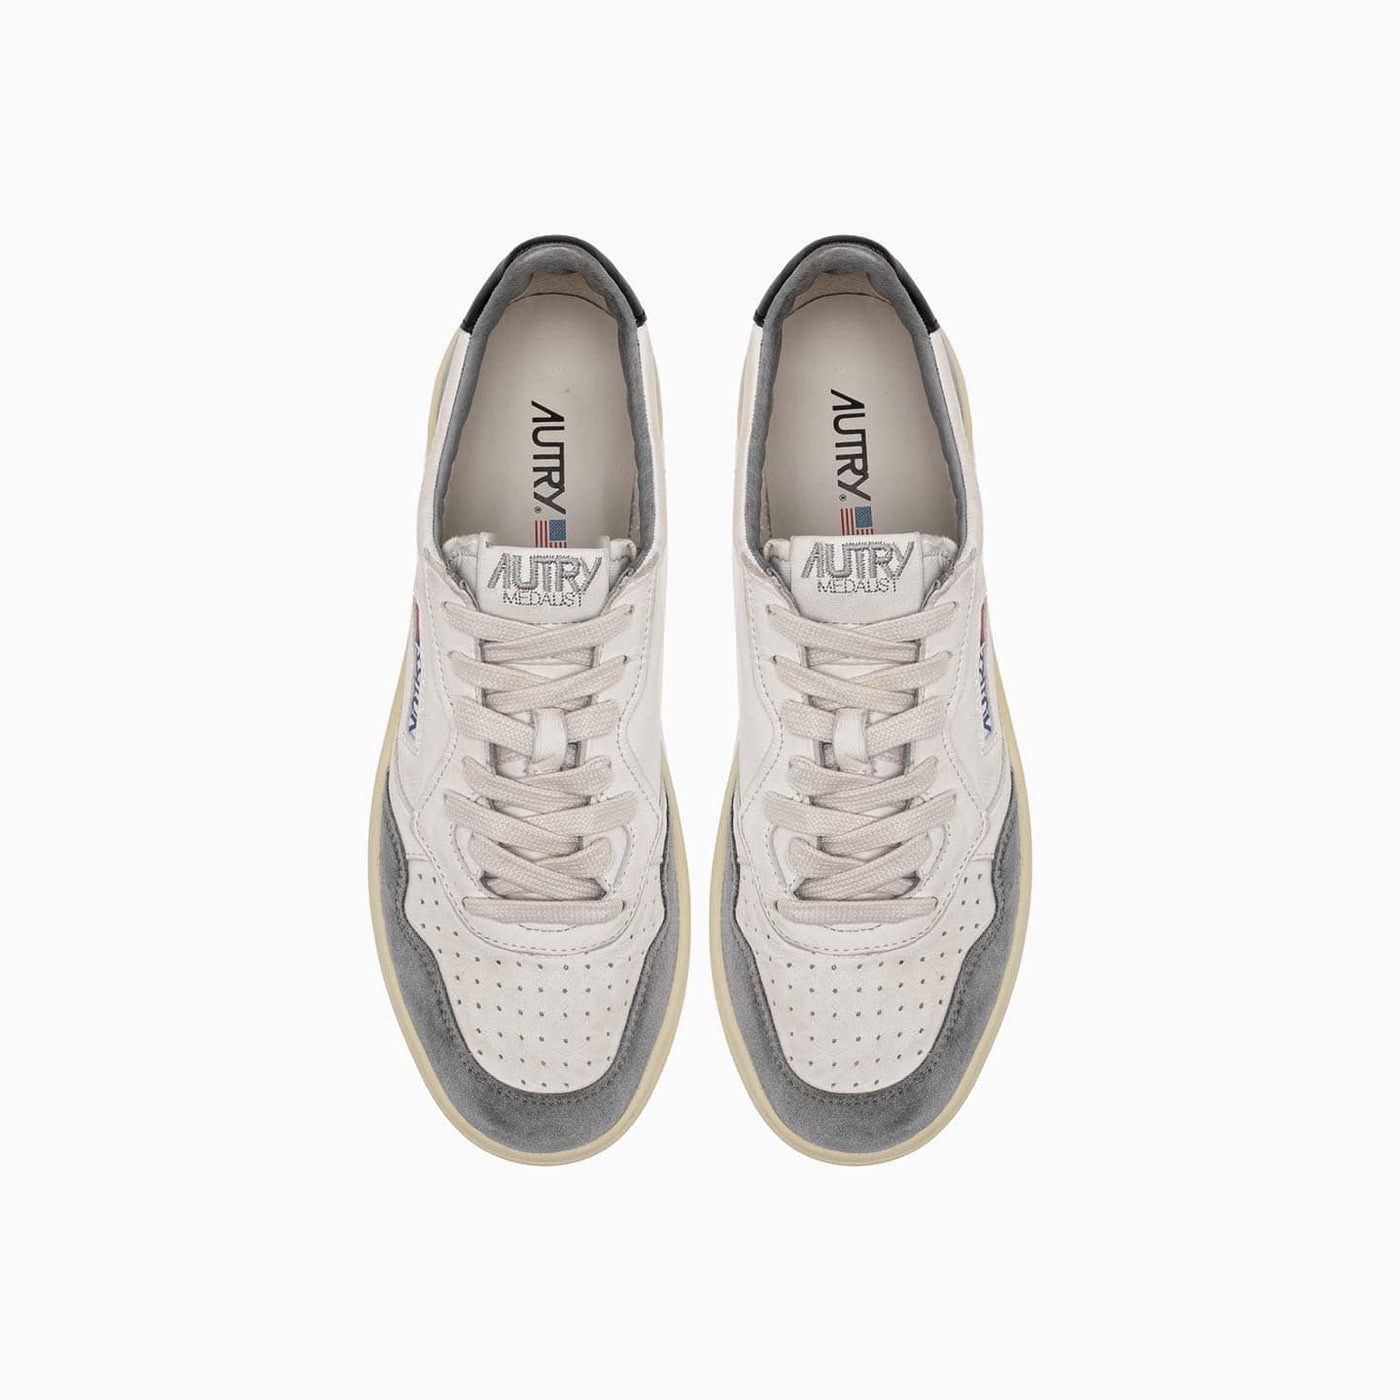 Autry Medalist Low Man Goat Suede Gray